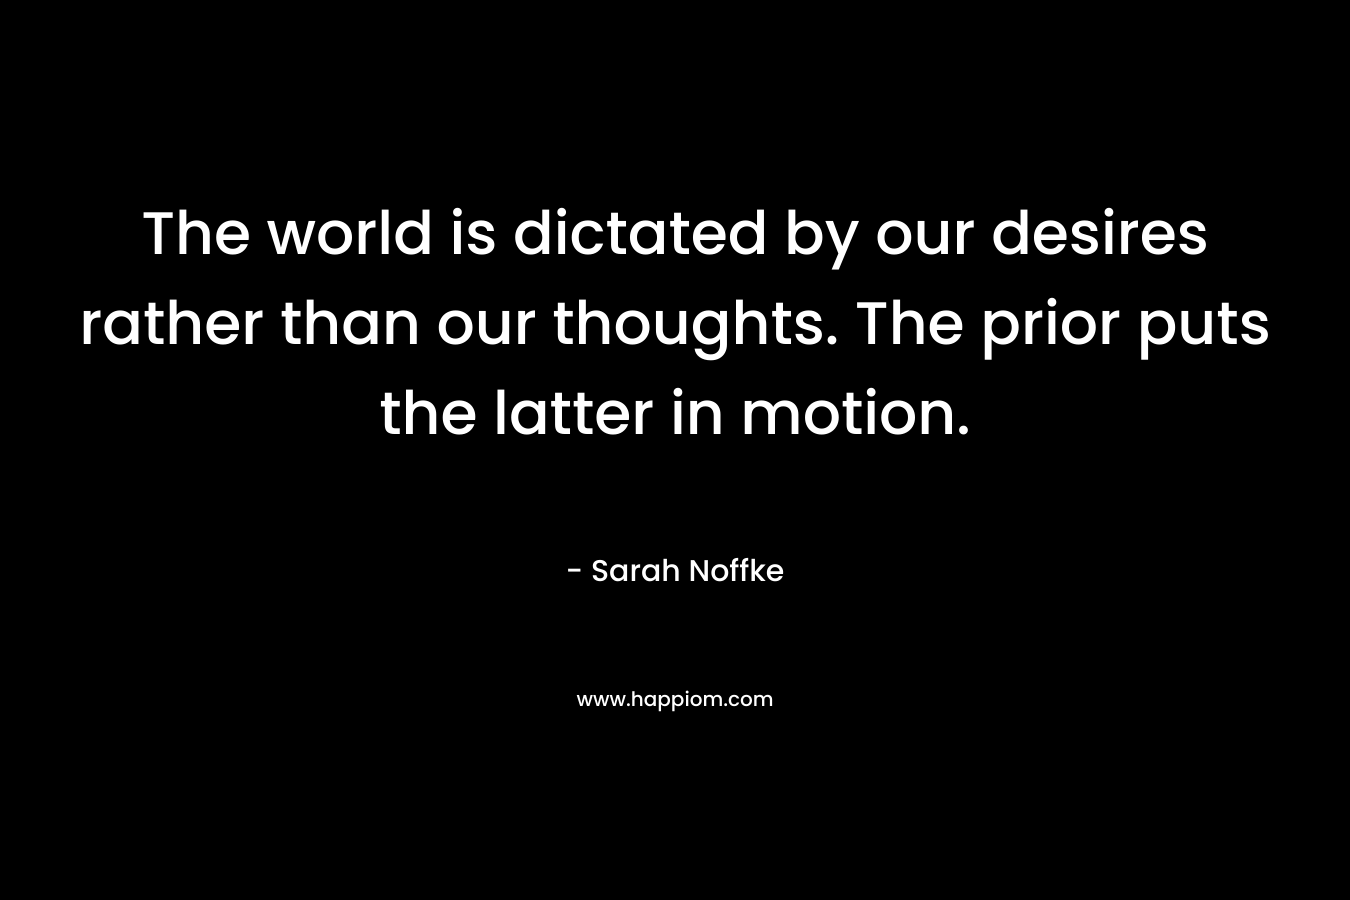 The world is dictated by our desires rather than our thoughts. The prior puts the latter in motion.